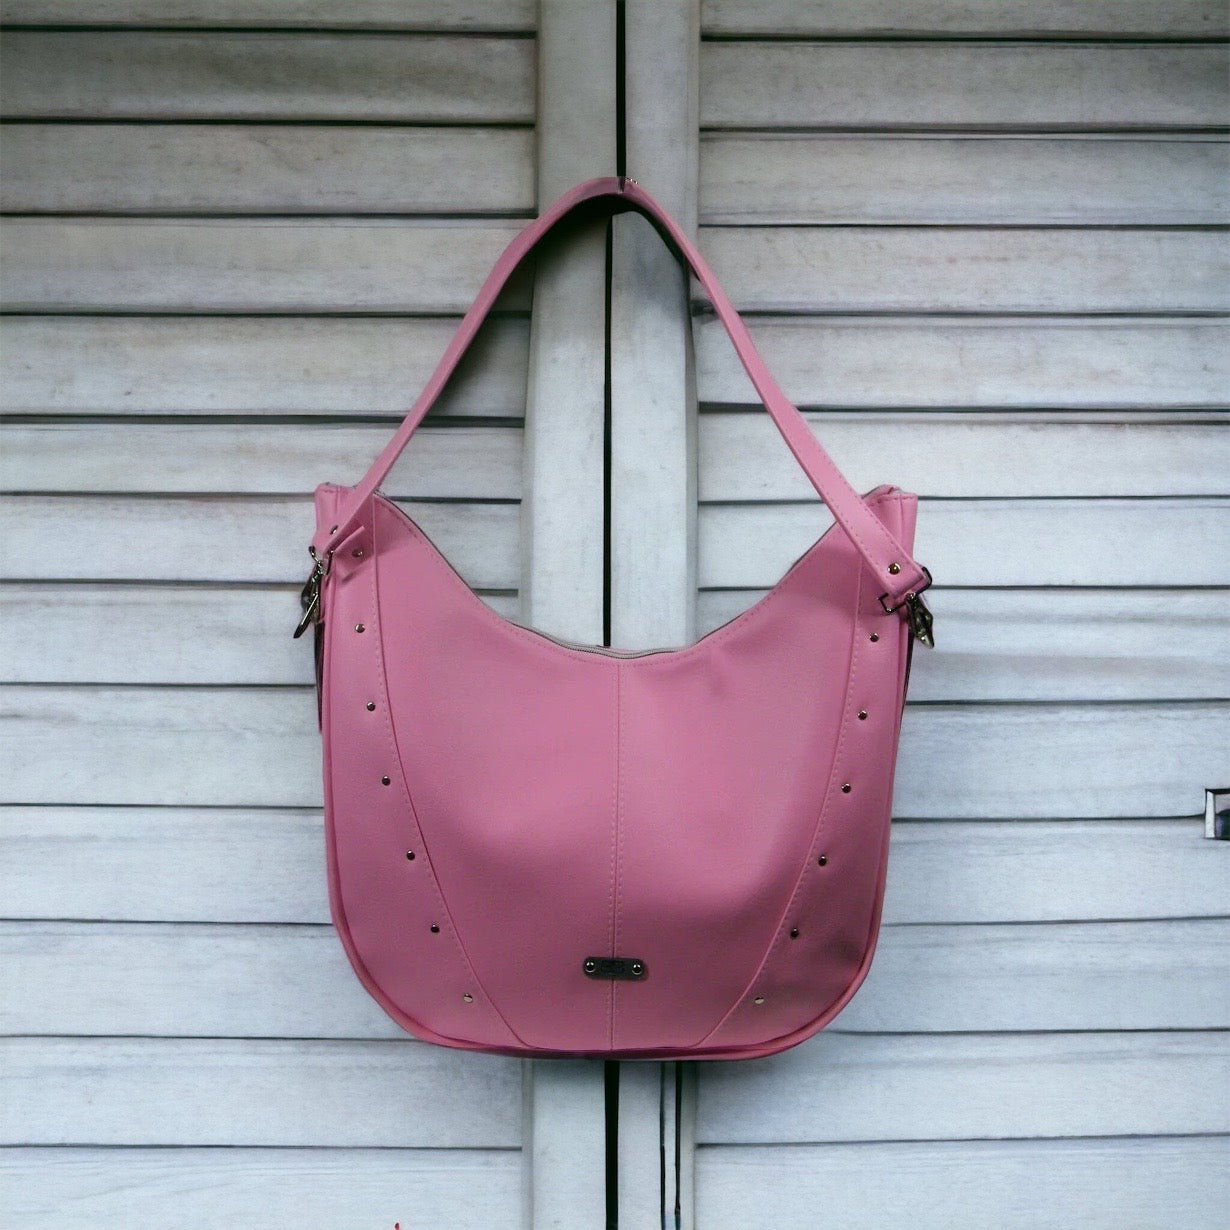 PRETTY IN PINK – Bags by Becky Mac